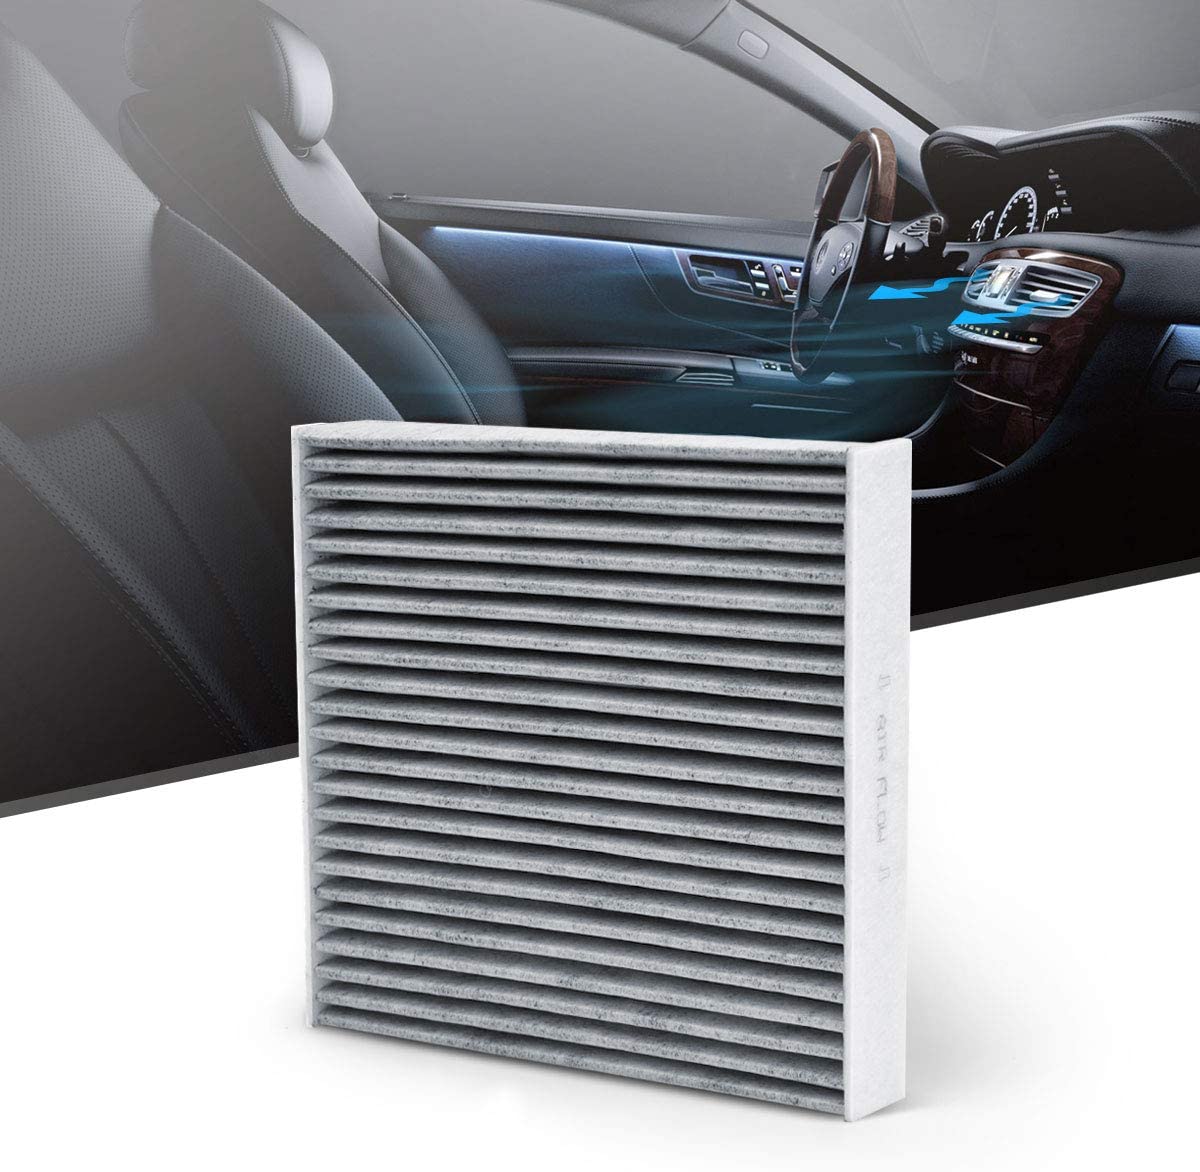 KAFEEK Cabin Air Filter Fits CF10285/87139-02090/87139-06040/87139-07010/87139-50060,Replacement for/Lexus/Scion, includes Activated Carbon